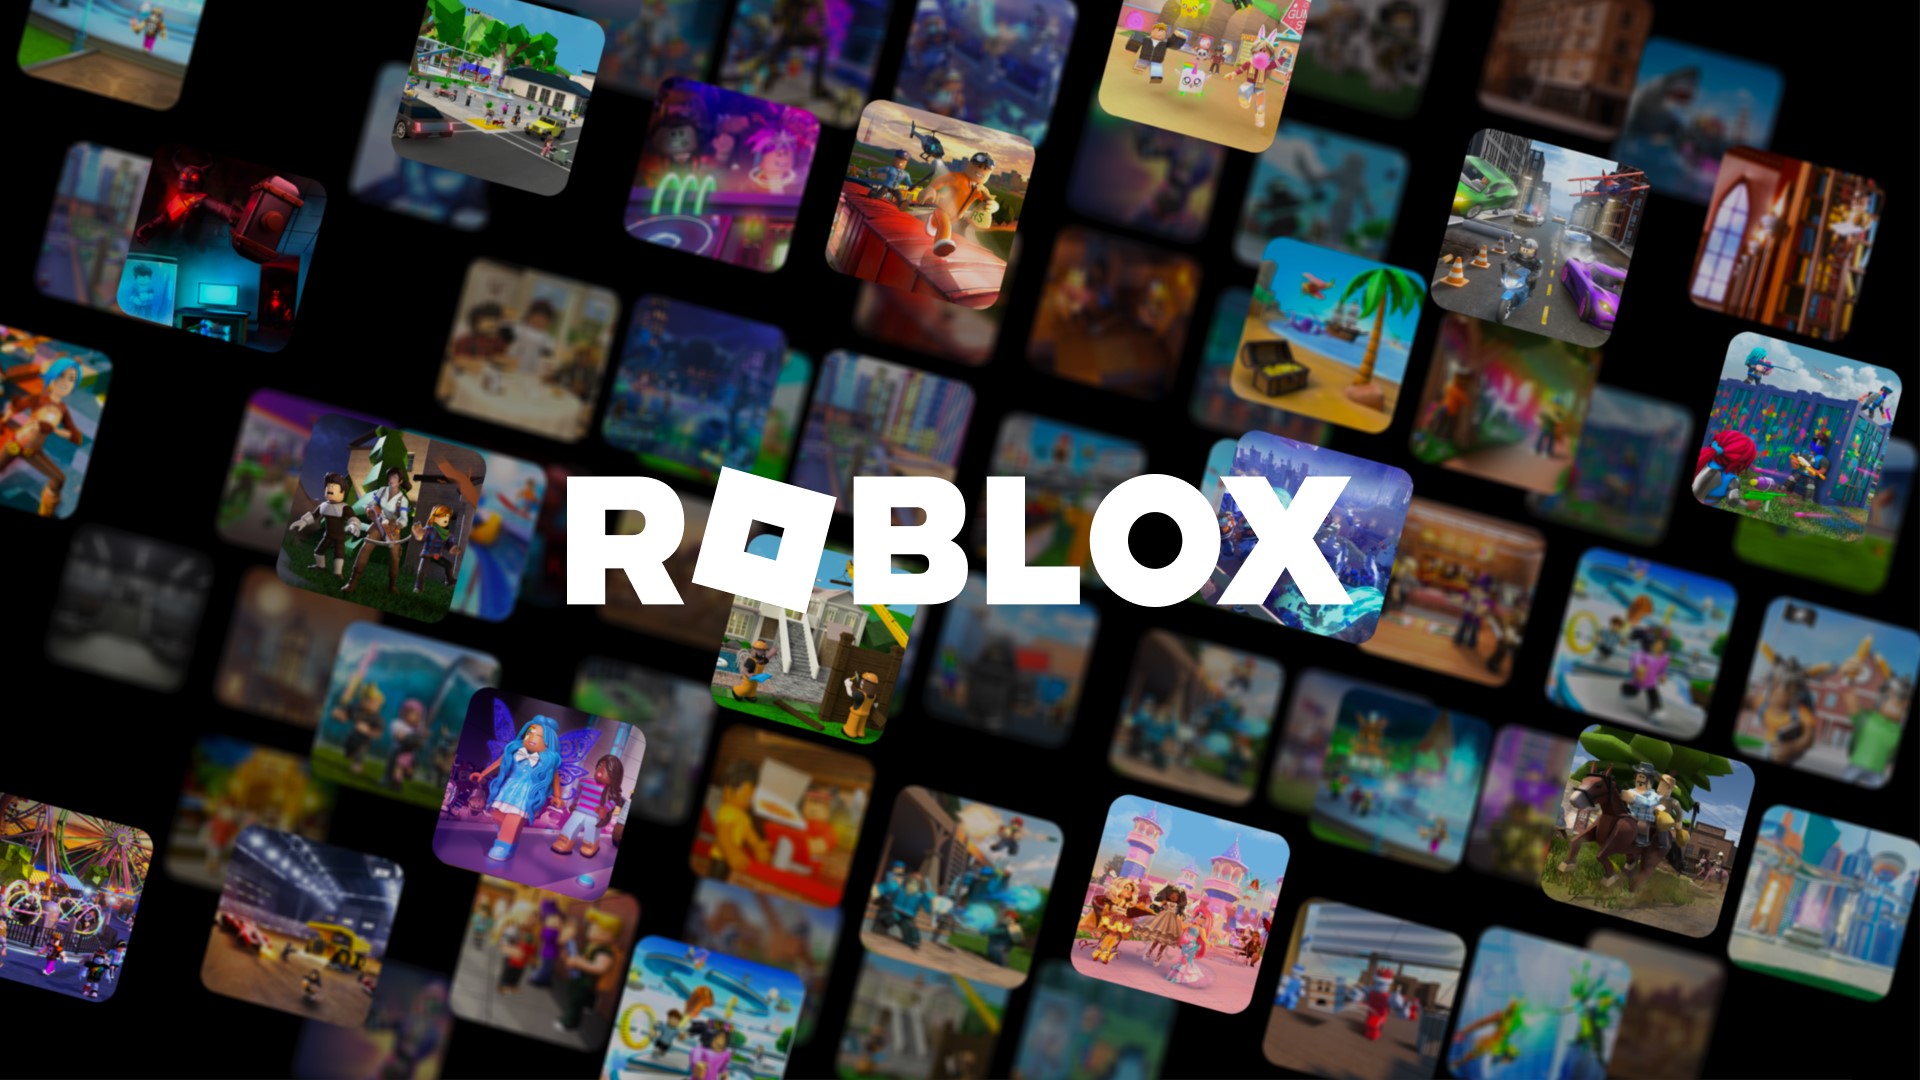 Roblox is coming to PS5, PS4 next month with a new dating feature